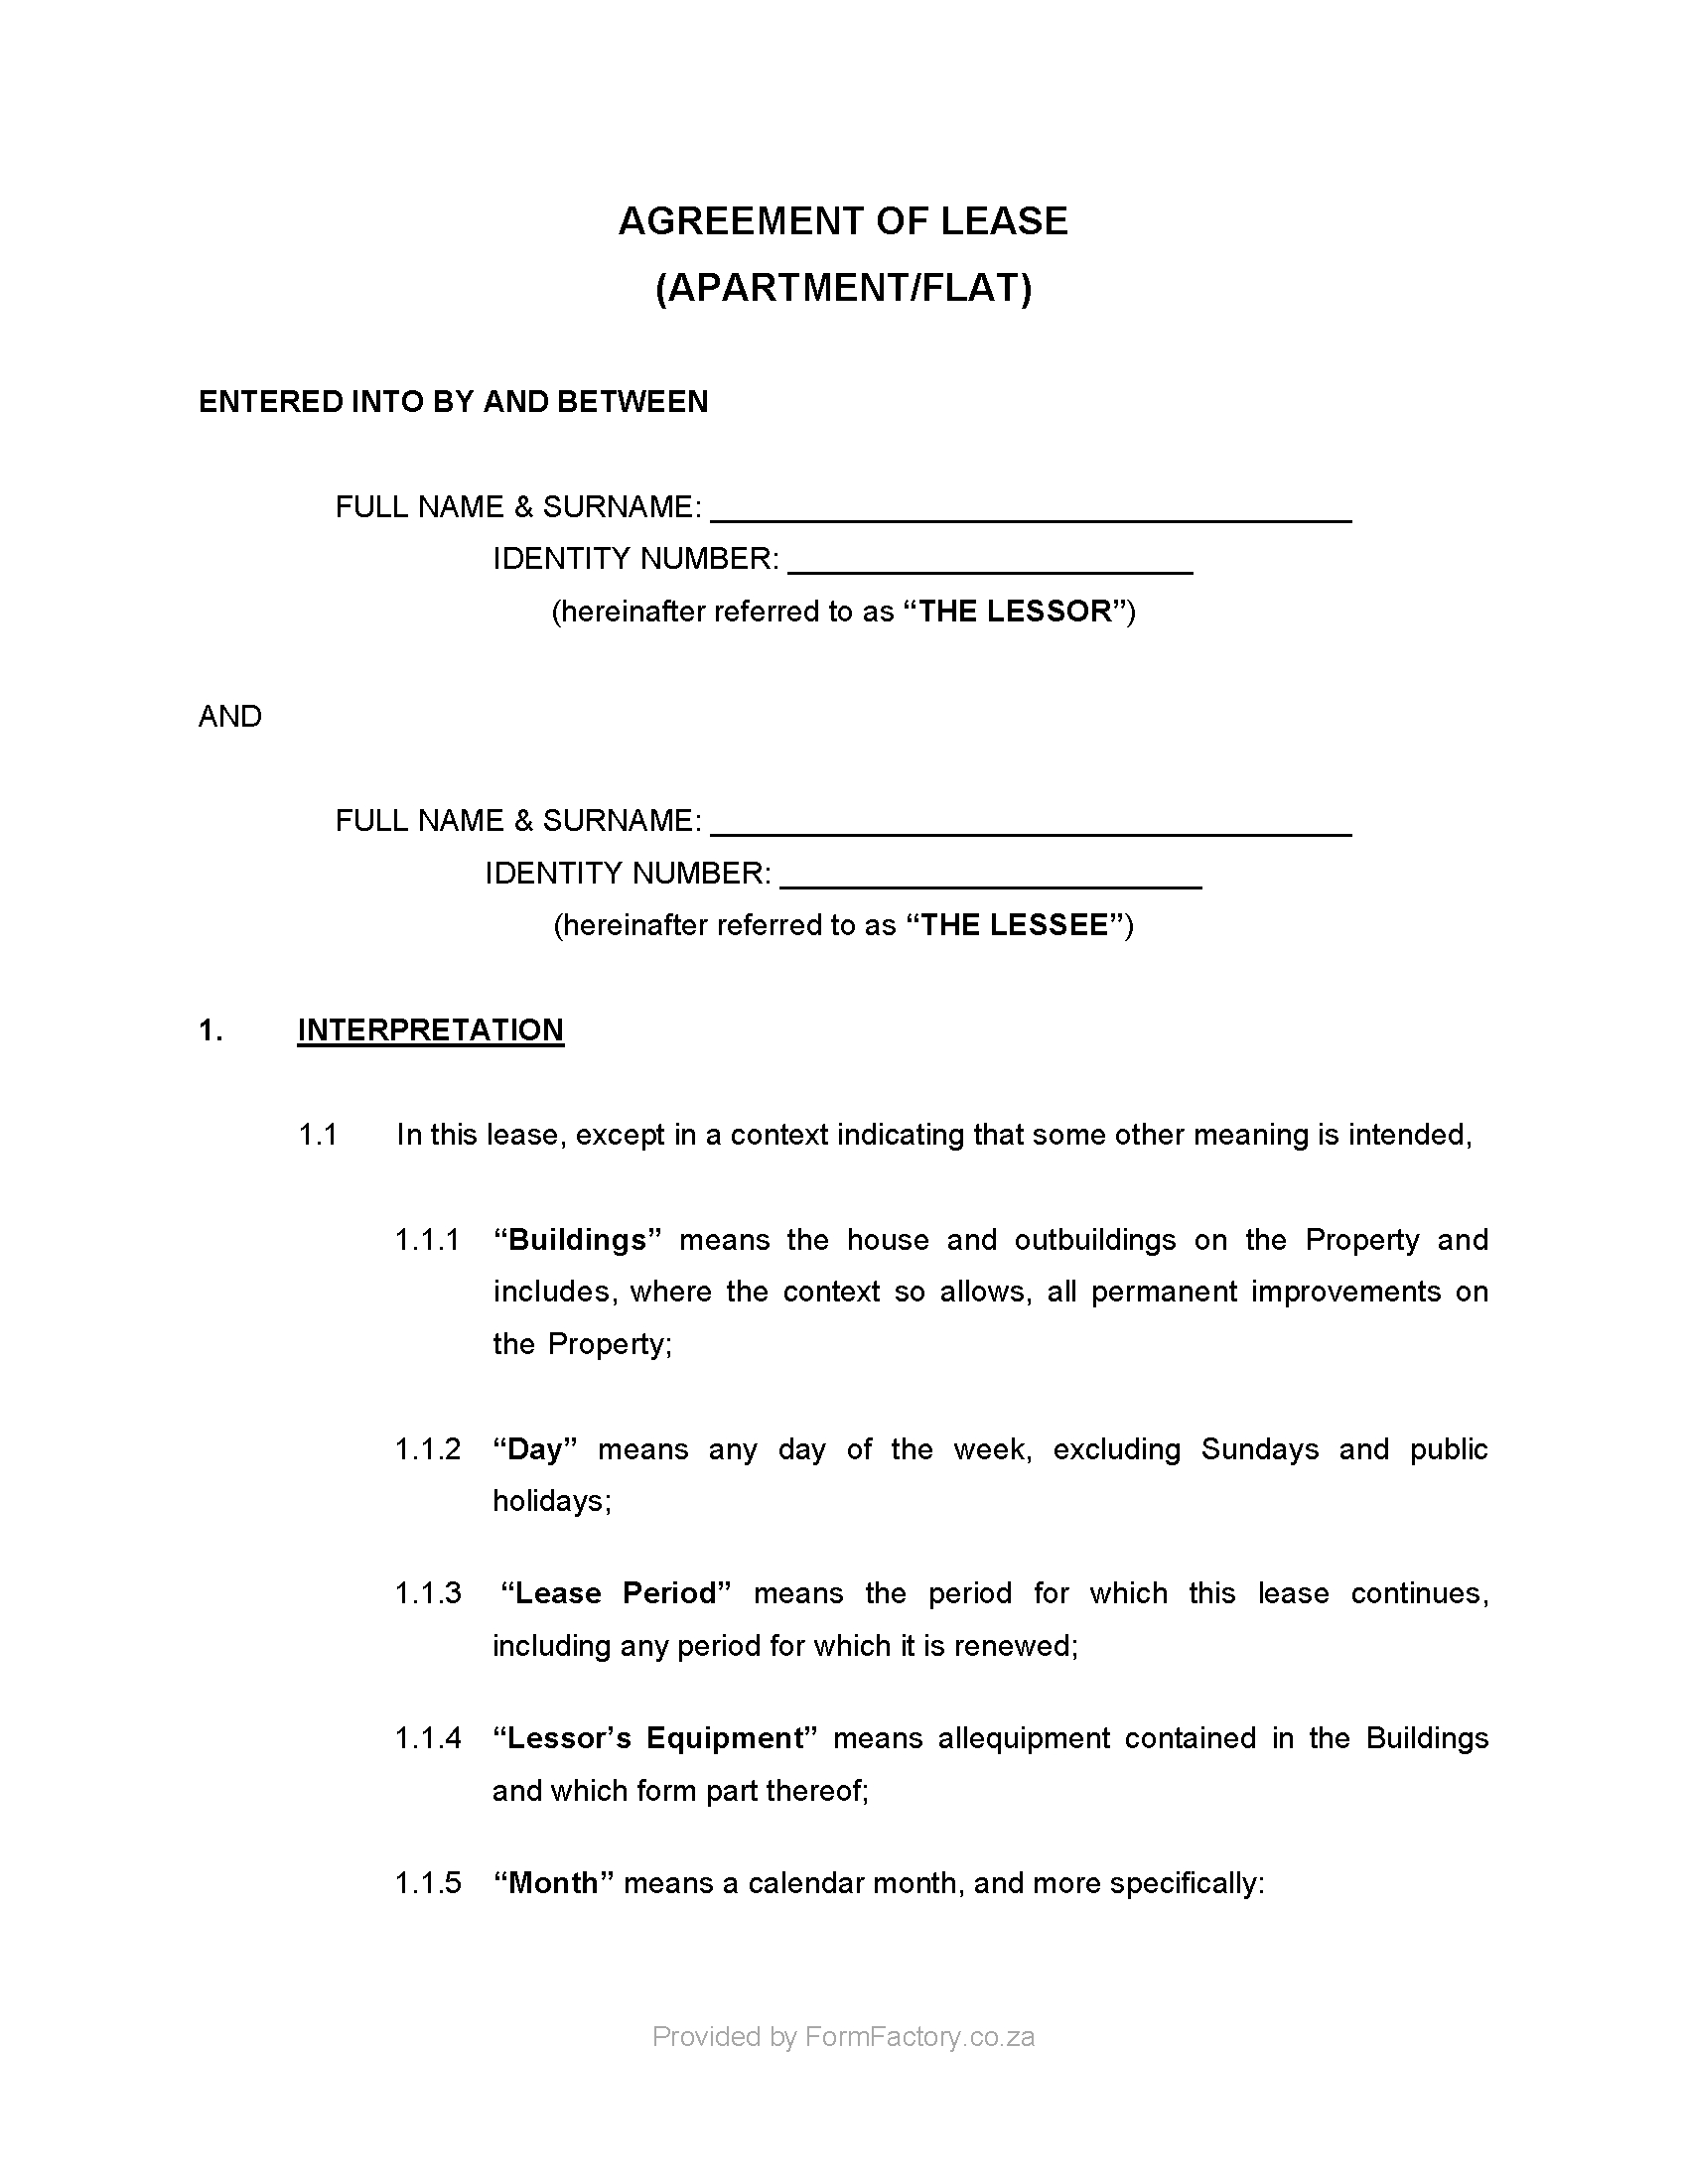 Mobile Home Lease Agreement Download Residential Lease Agreement Template Formfactory